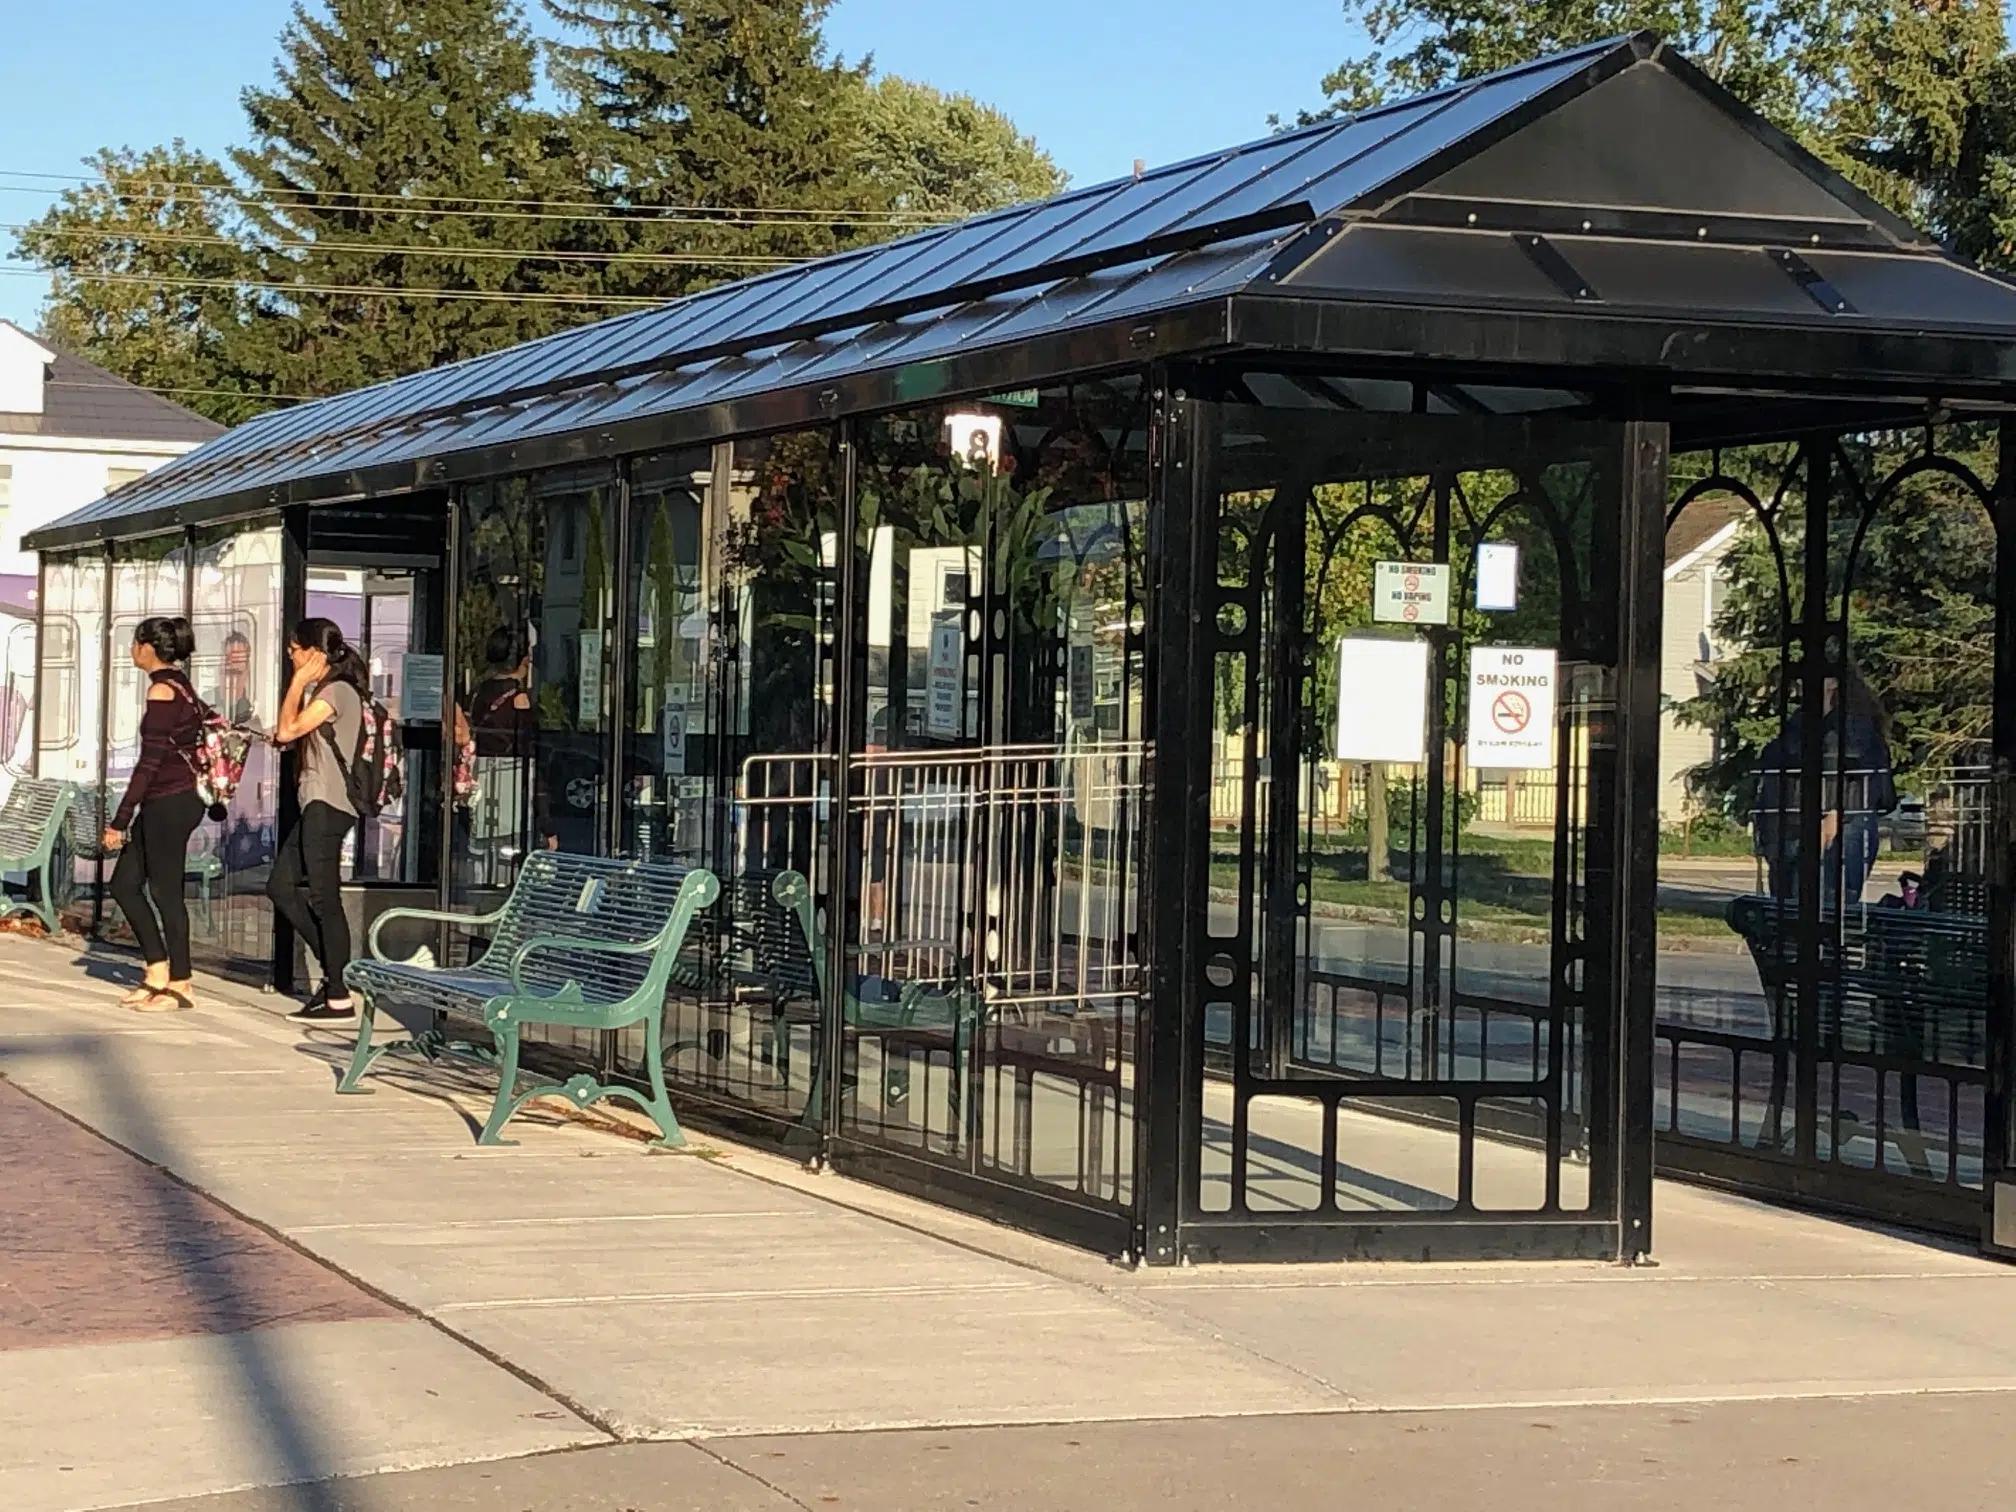 Upgrades and new bus shelters